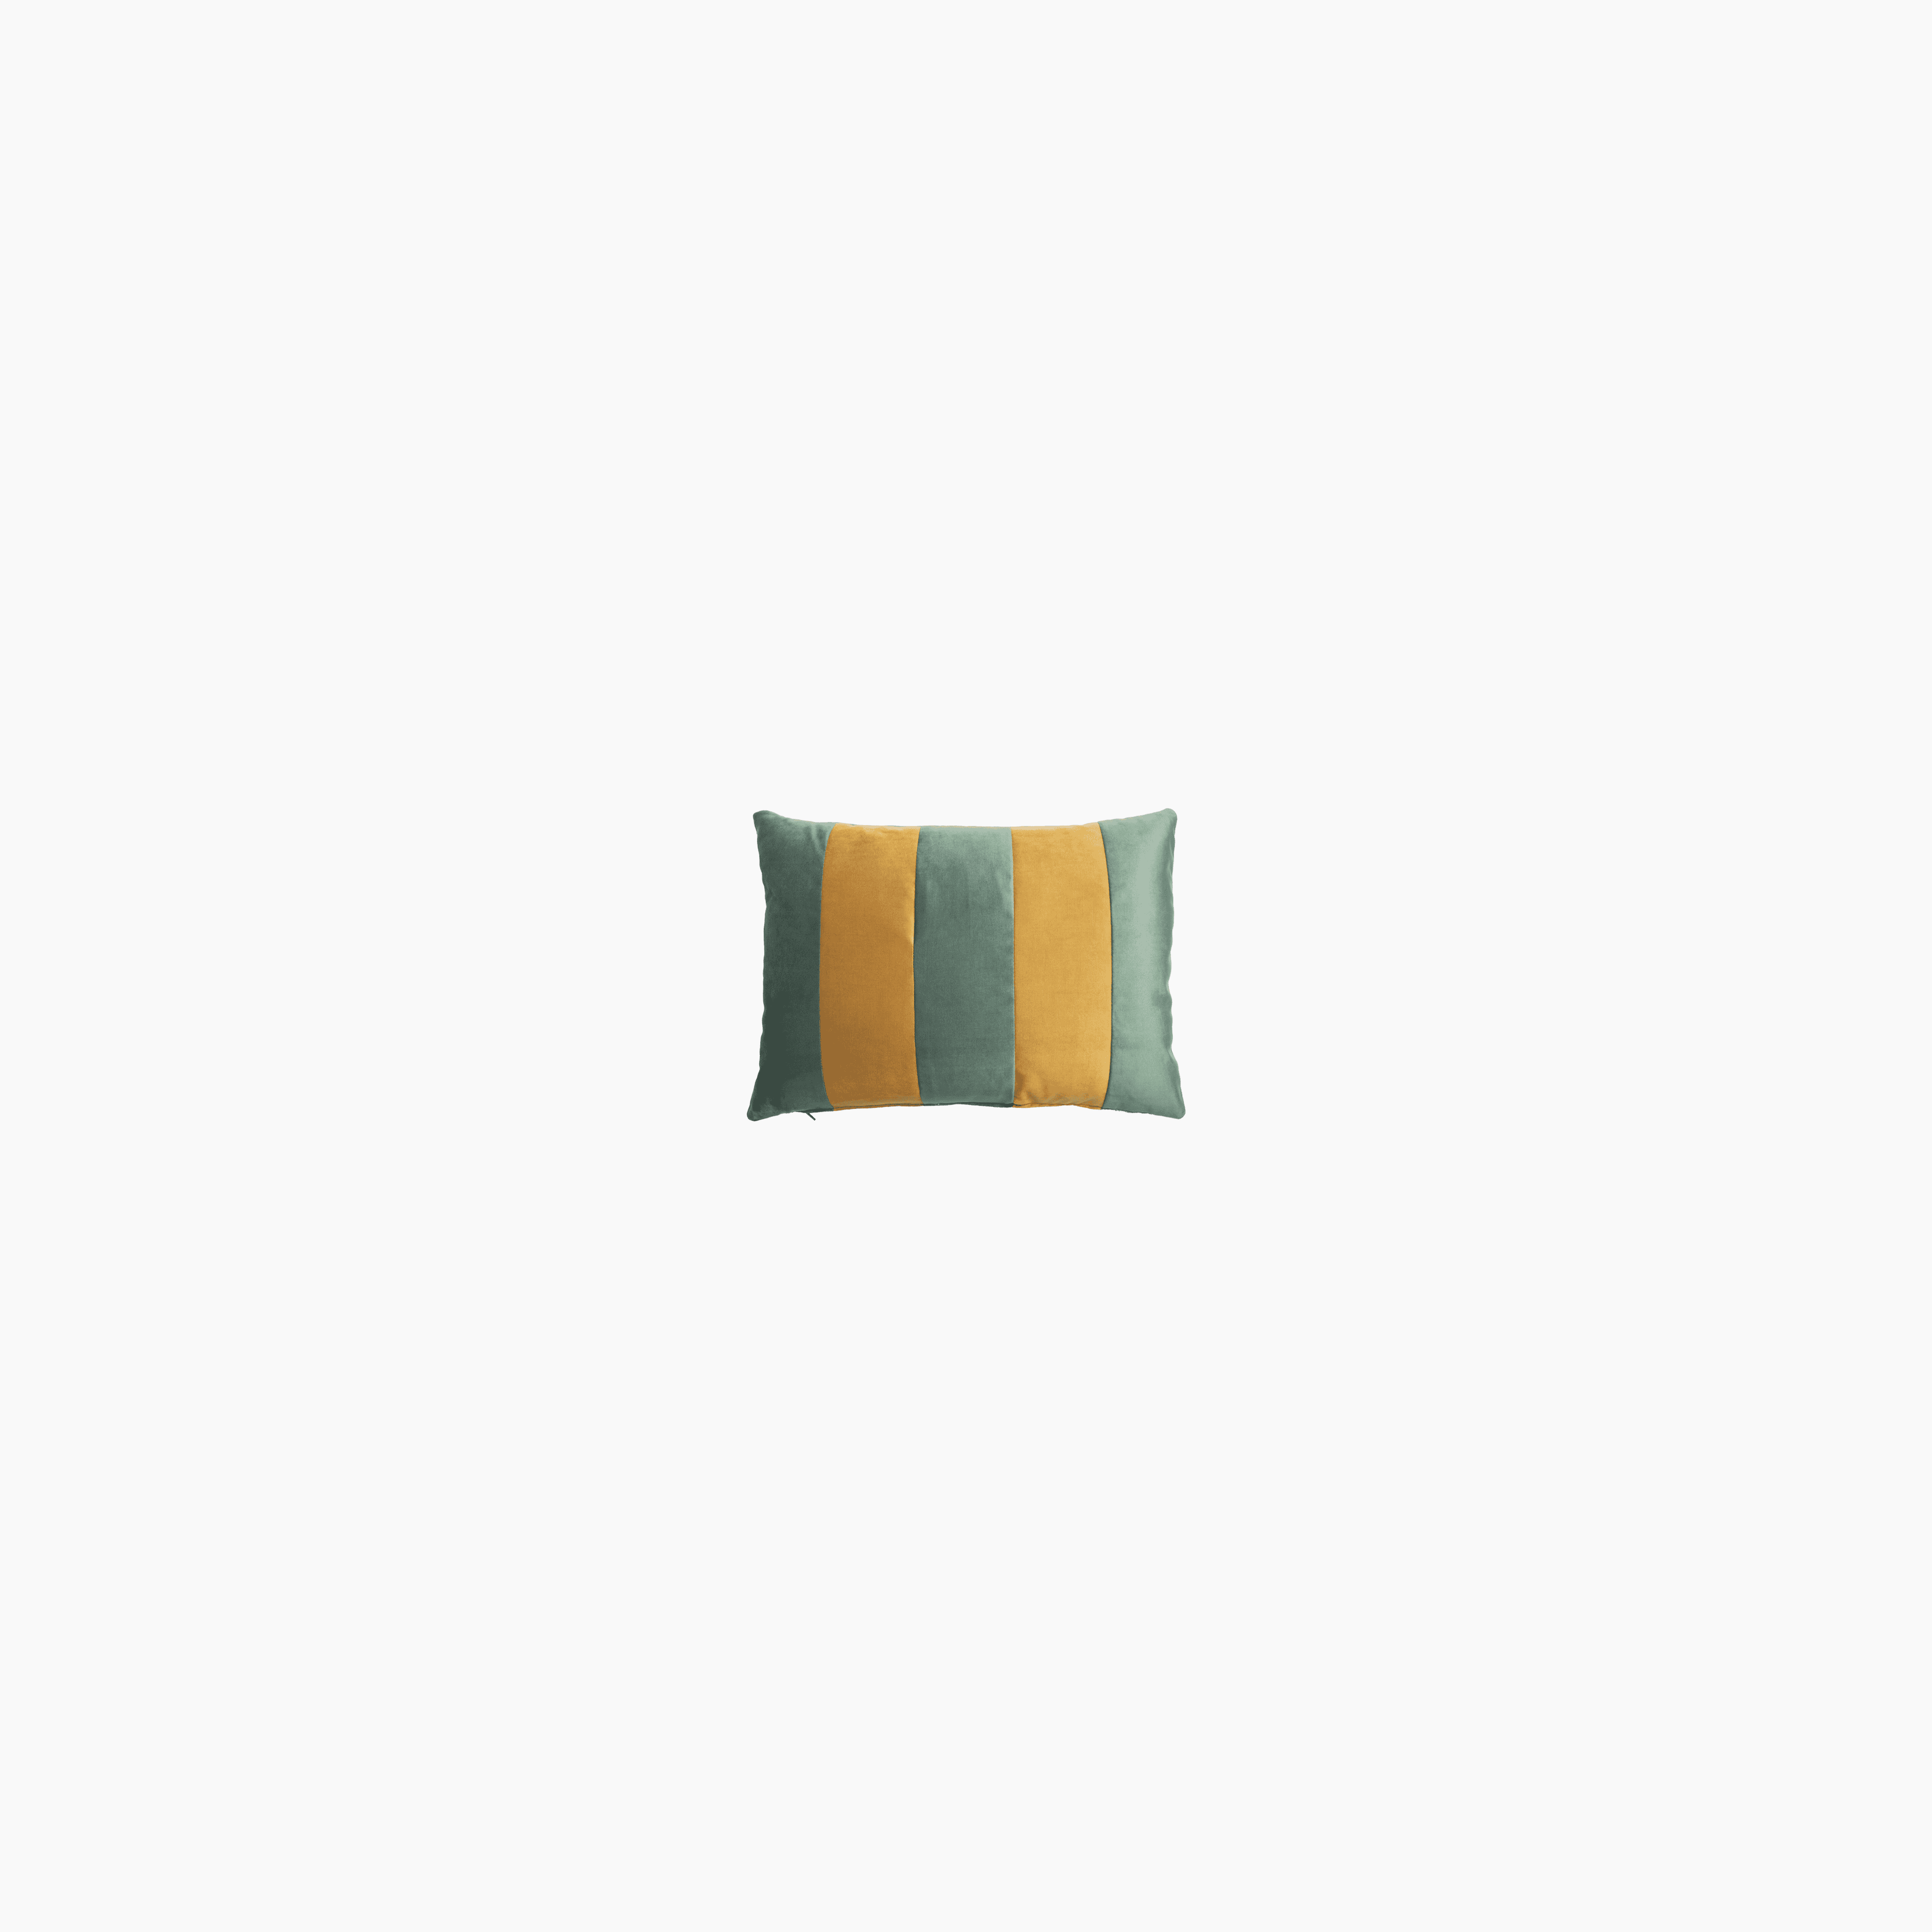 The Striped Pillow